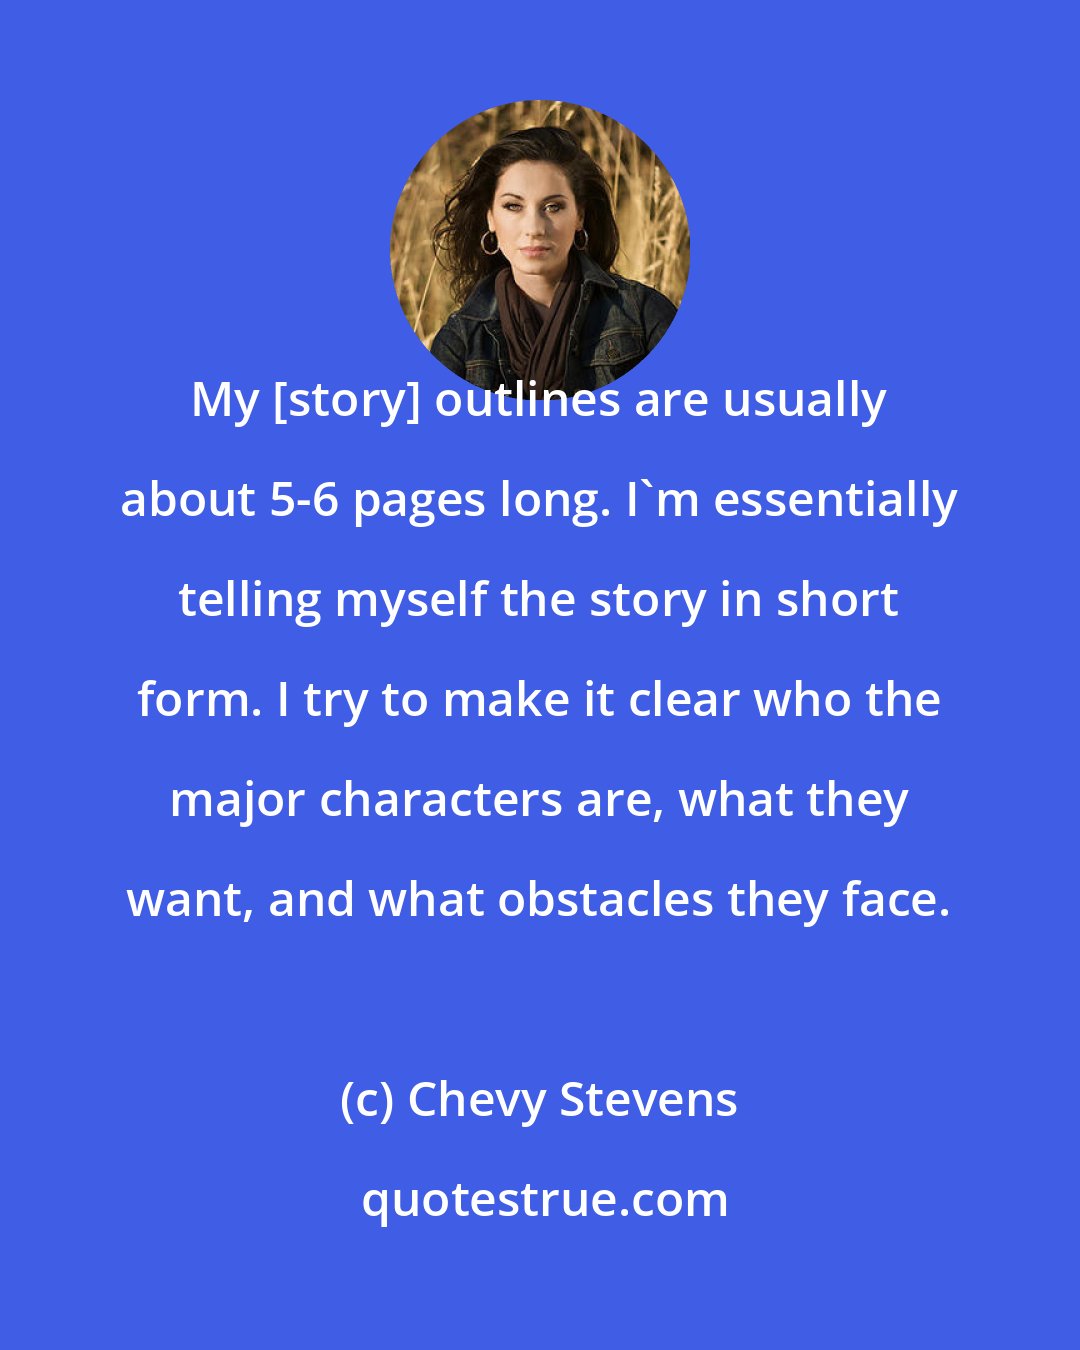 Chevy Stevens: My [story] outlines are usually about 5-6 pages long. I'm essentially telling myself the story in short form. I try to make it clear who the major characters are, what they want, and what obstacles they face.